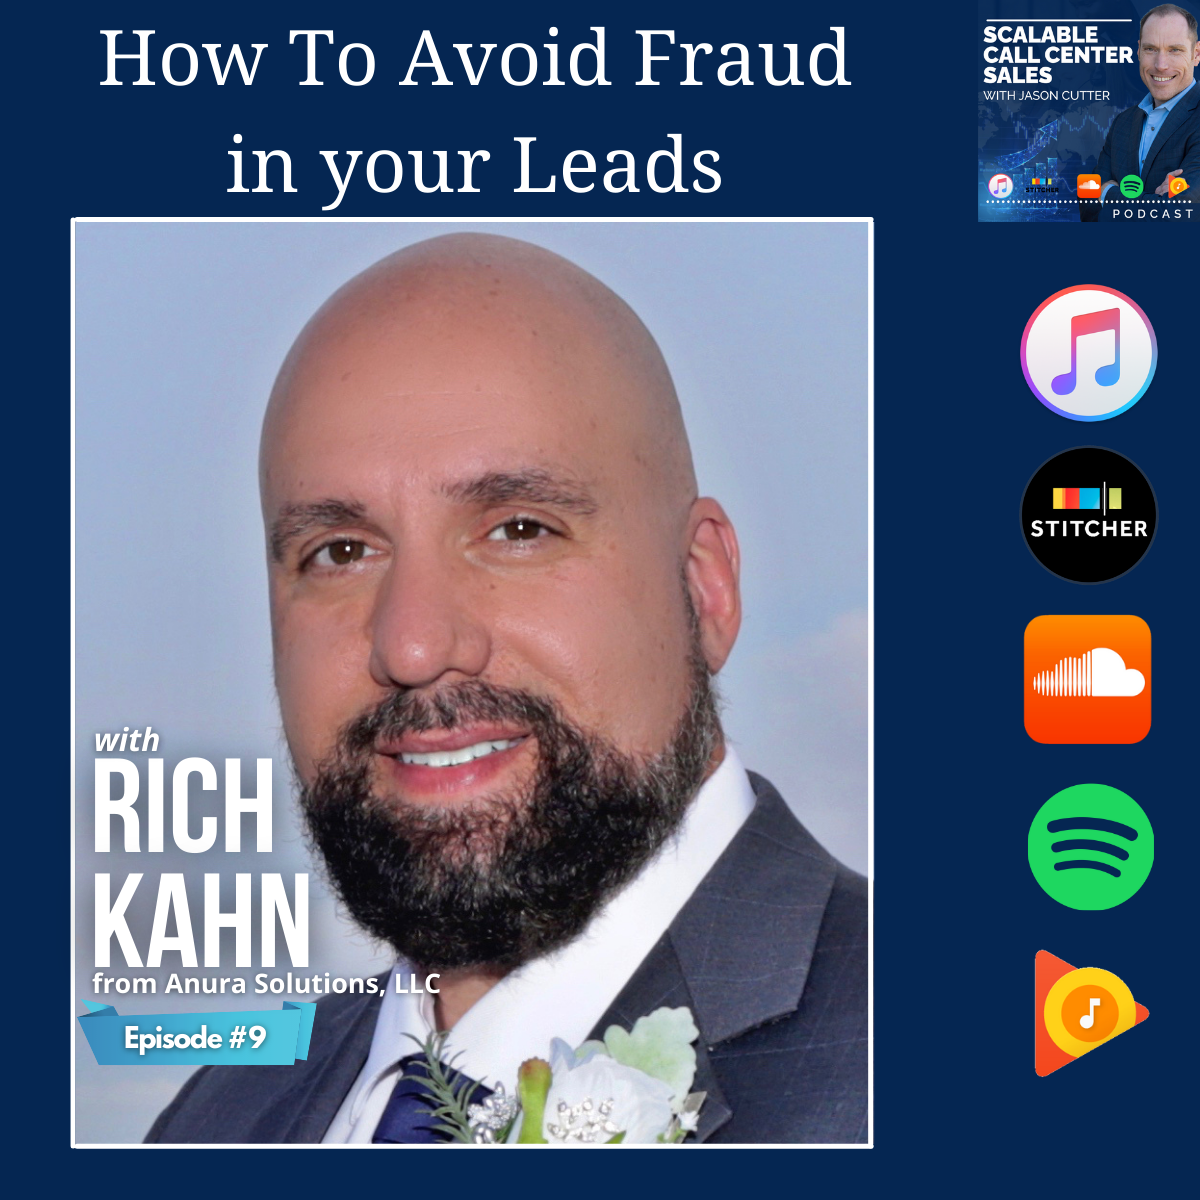 [009] How To Avoid Fraud in your Leads, with Rich Kahn from Anura